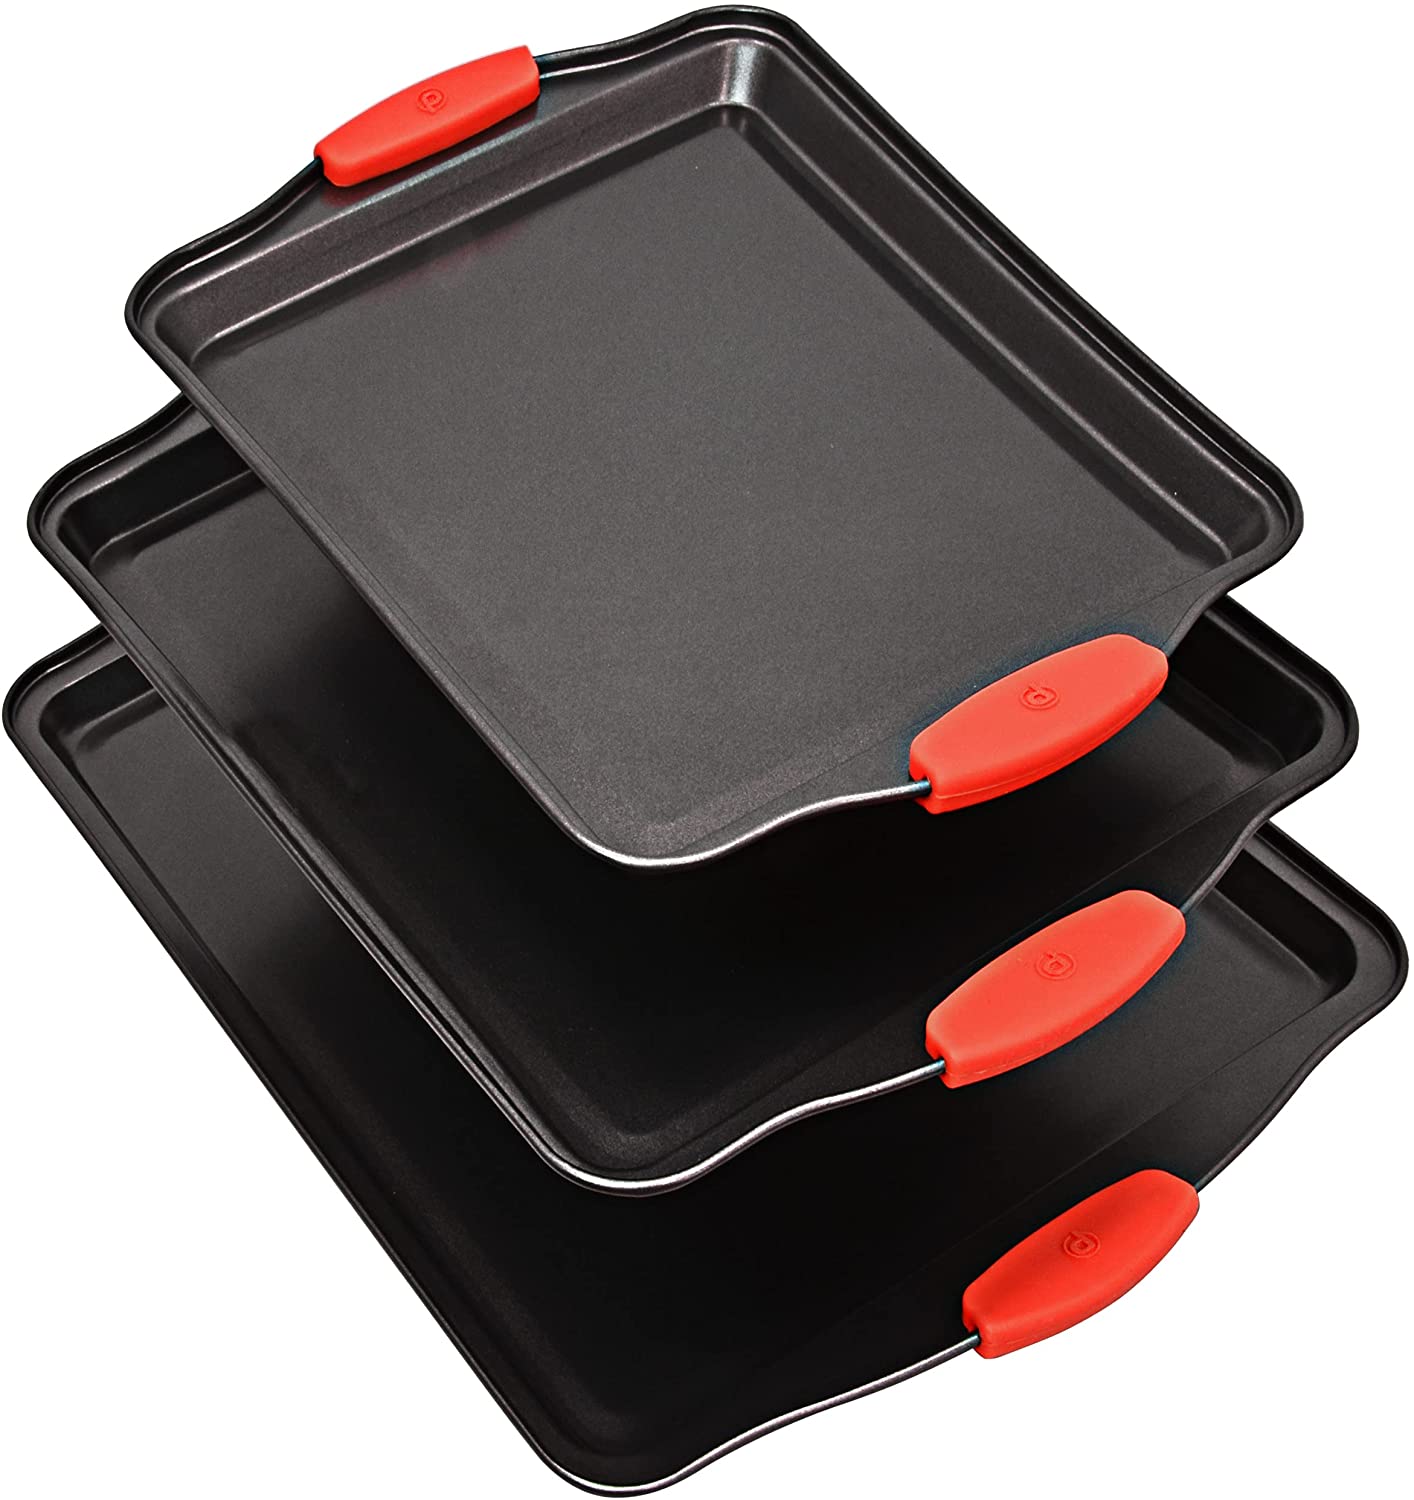 URKNO Non-Stick Carbon Steel Baking Sheet URKNO